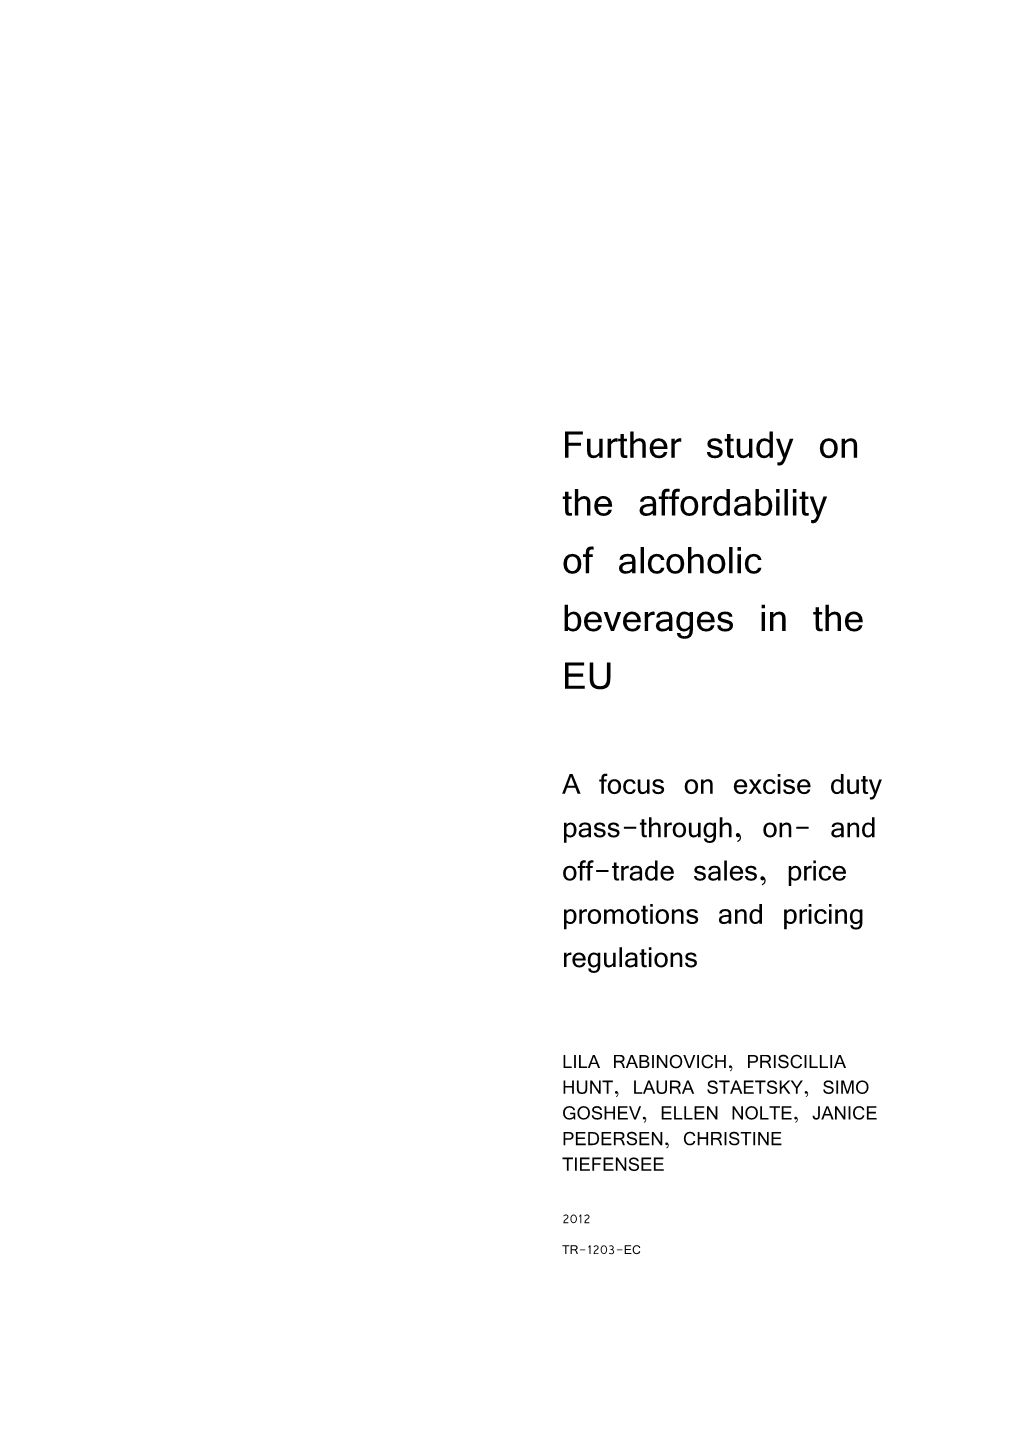 Further Study on the Affordability of Alcoholic Beverages in the EU